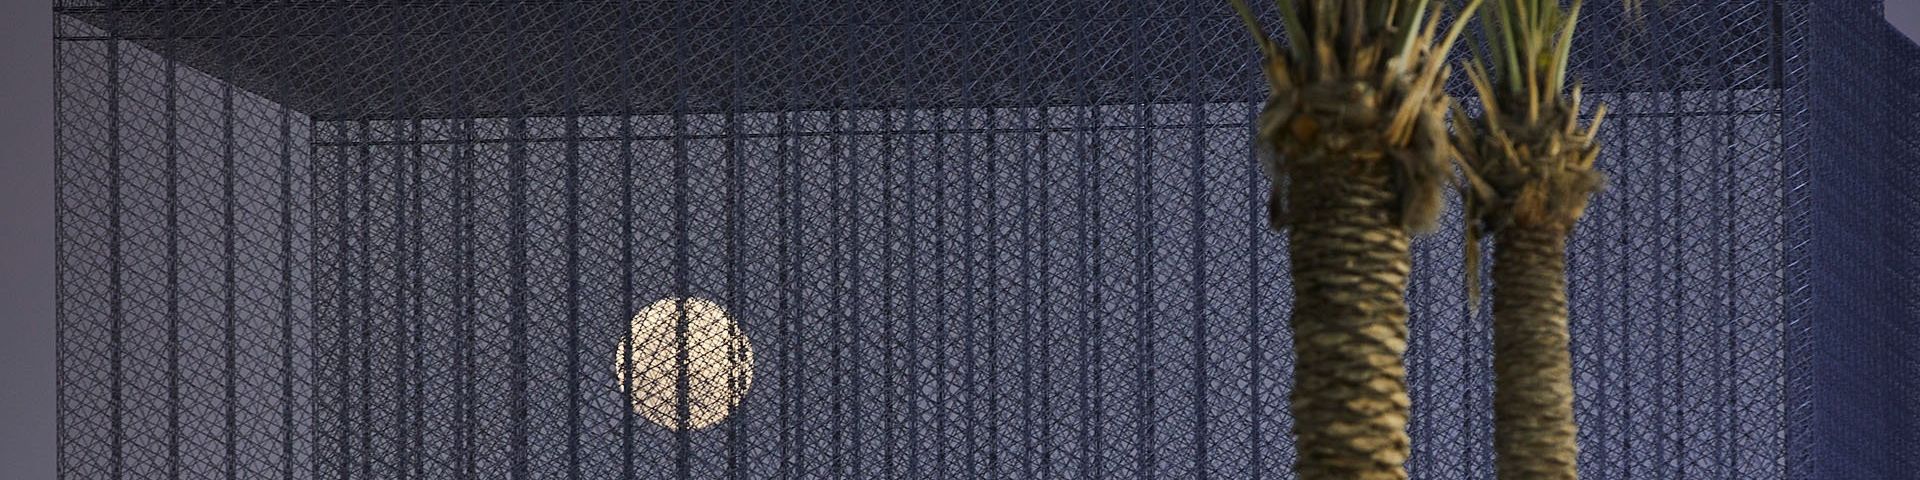 A full moon against a dark blue sky can be seen through what appears to be black mesh. To the right and in front of the mesh are the trunks of two palm-like trees.